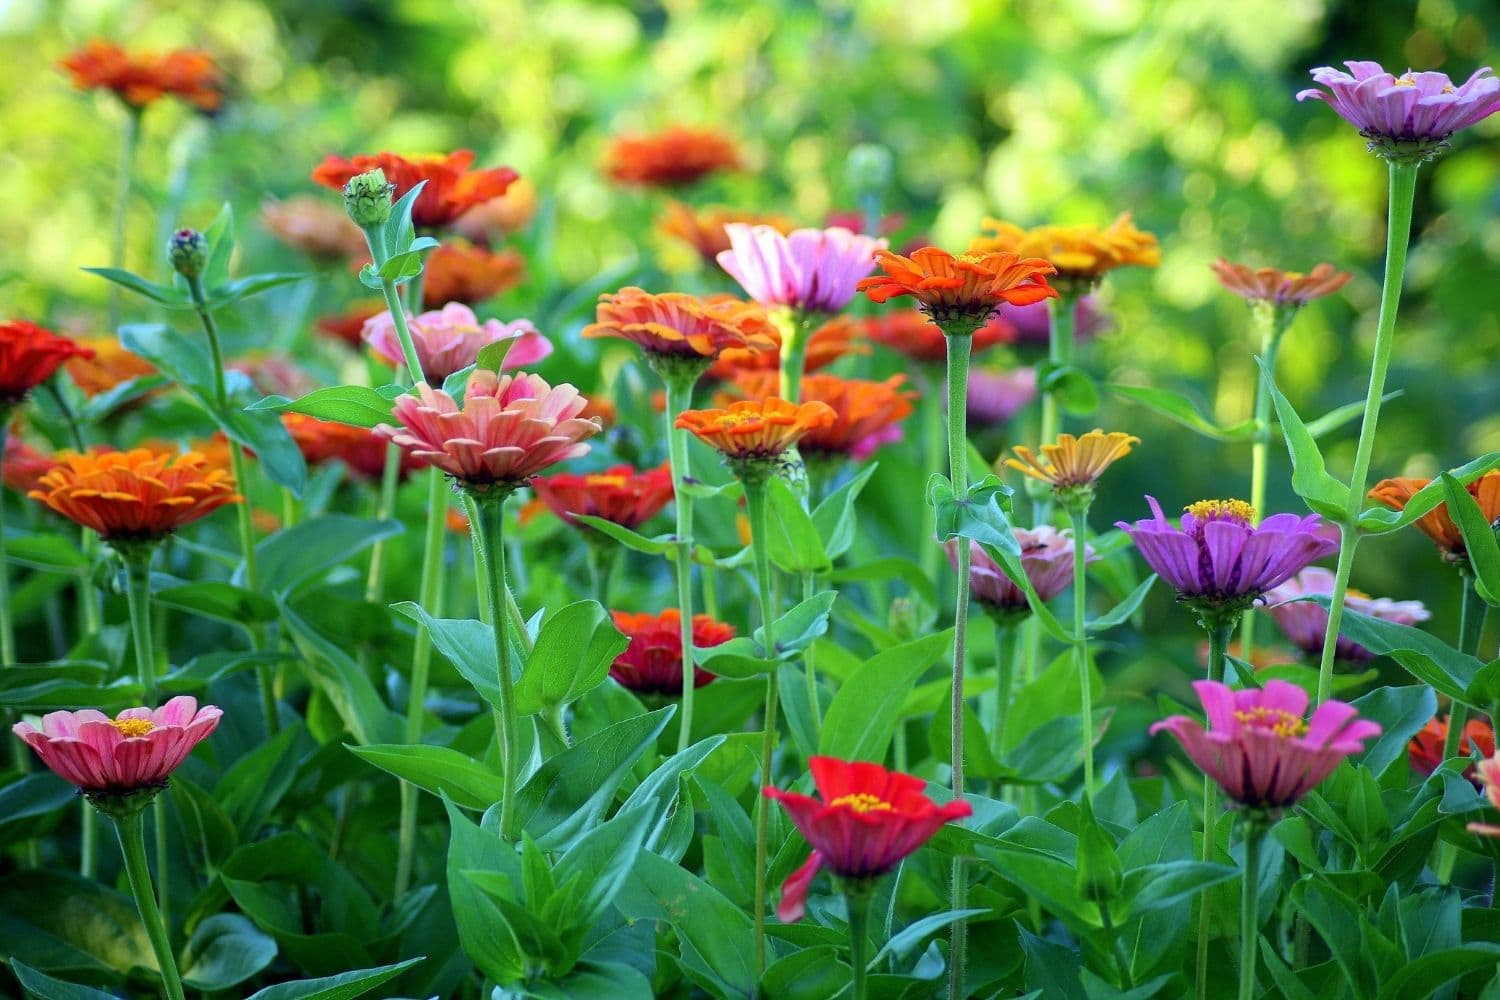 Preparing Your Garden for the Warmer Weather